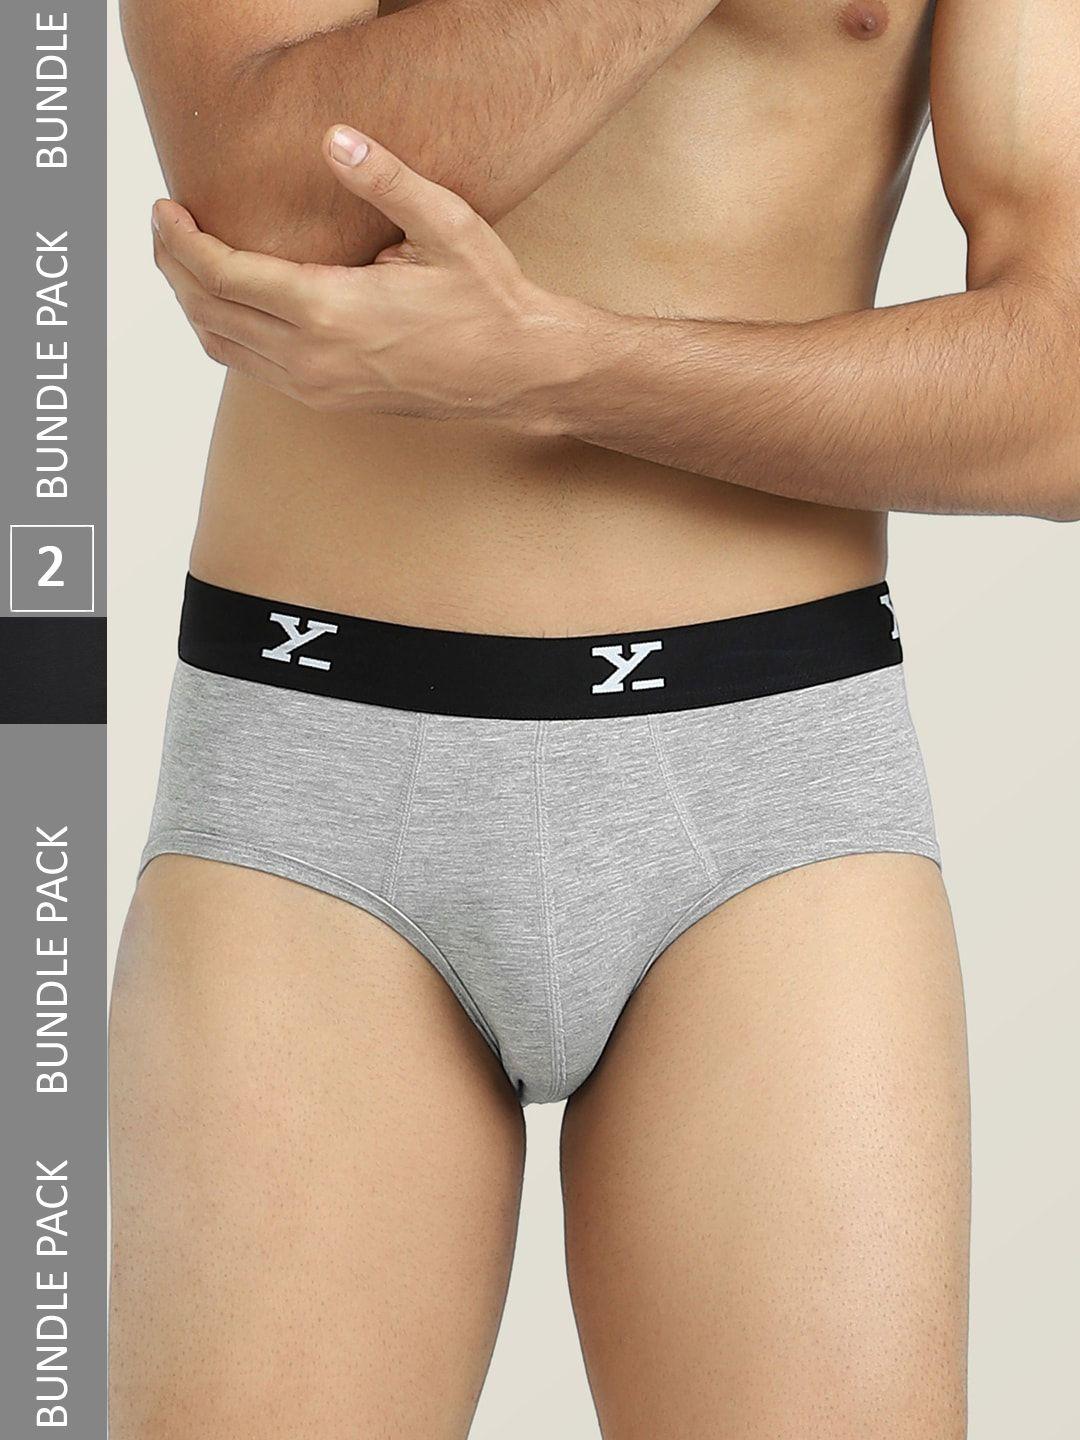 xyxx-men-pack-of-2-intellisoft-antimicrobial-micro-modal-dualist-briefs-xybrf2pckn607